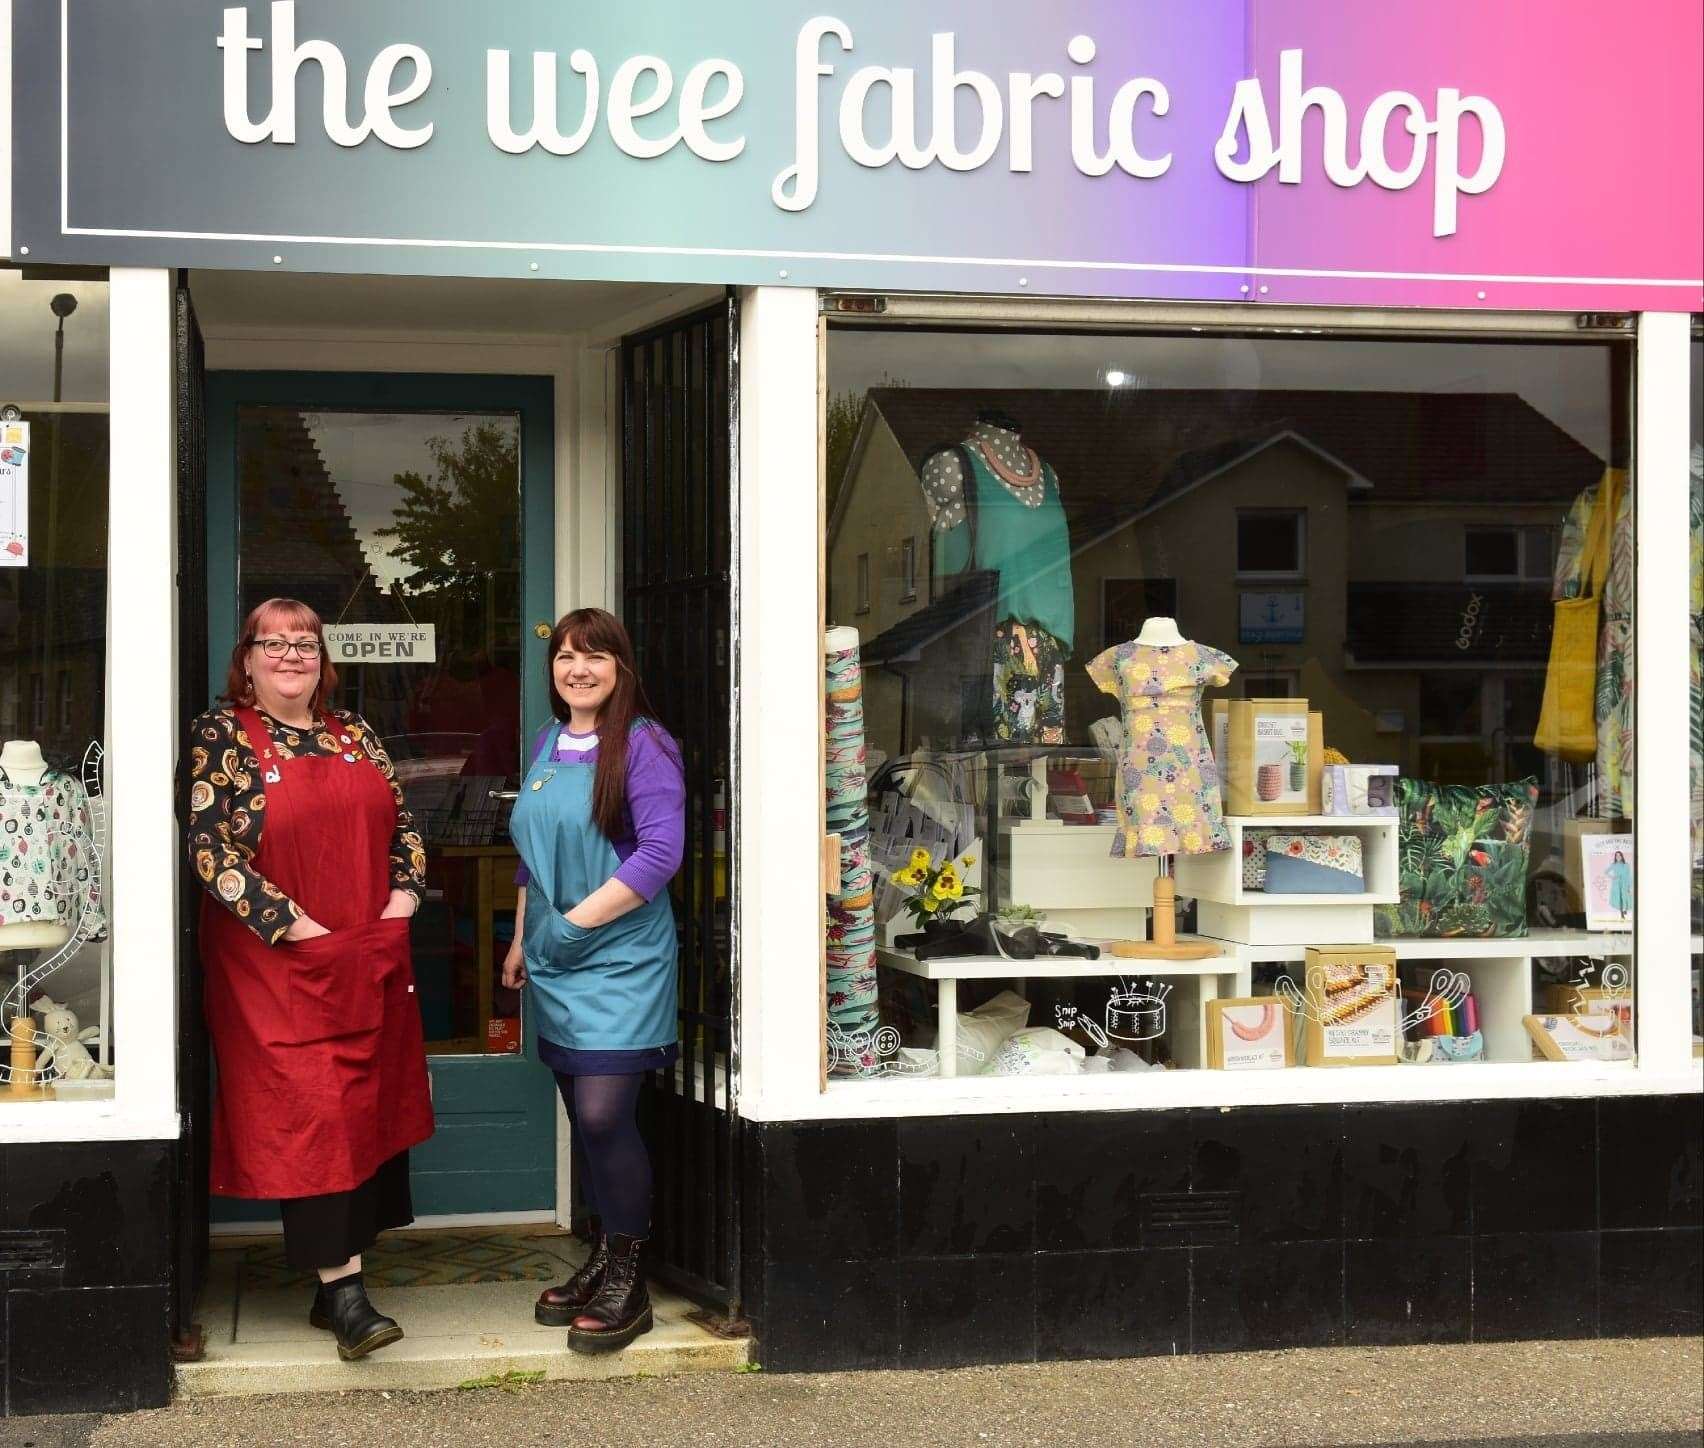 Fiona Mackie and Marice Gneba from The Wee Fabric Shop.